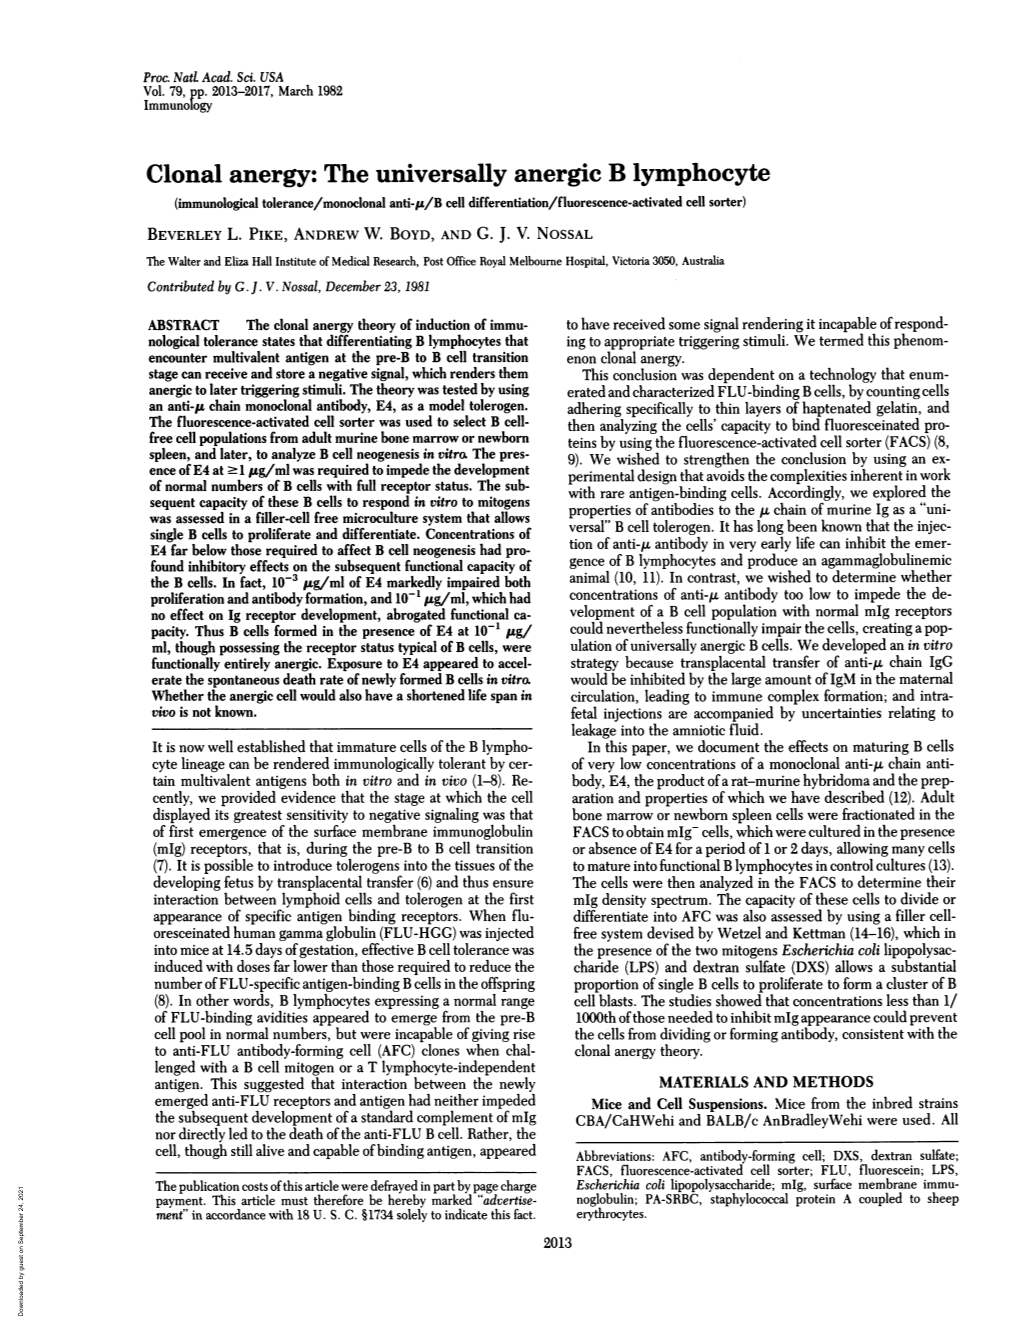 Clonal Anergy: the Universally Anergic B Lymphocyte (Immunological Tolerance/Monoclonal Anti-,A/B Cell Differentiation/Fluorescence-Activated Cell Sorter) BEVERLEY L